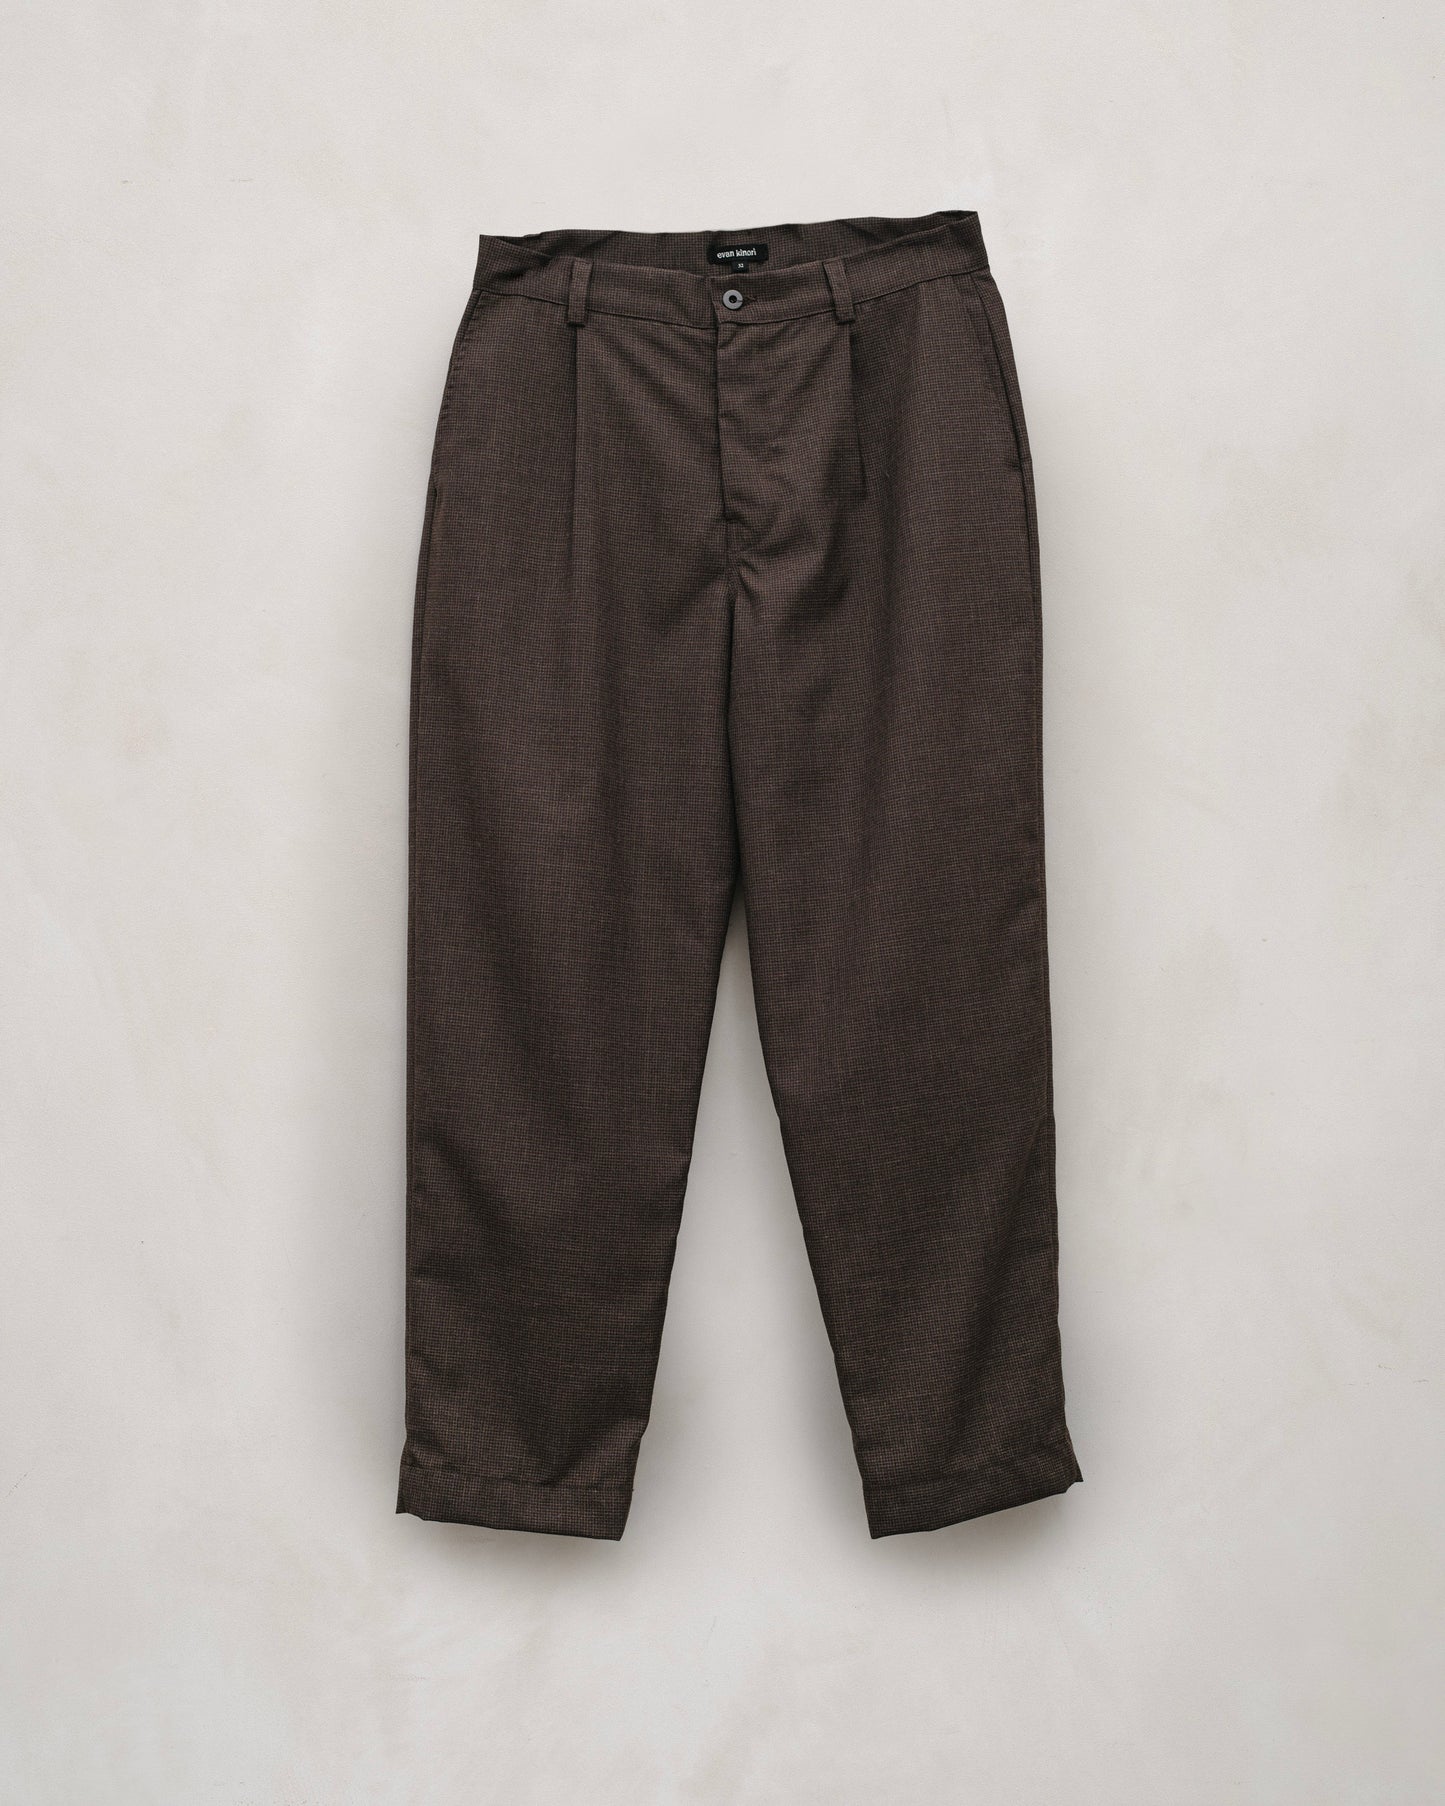 Single Pleat Pant - Fox Worsted Wool Puppytooth, Brown